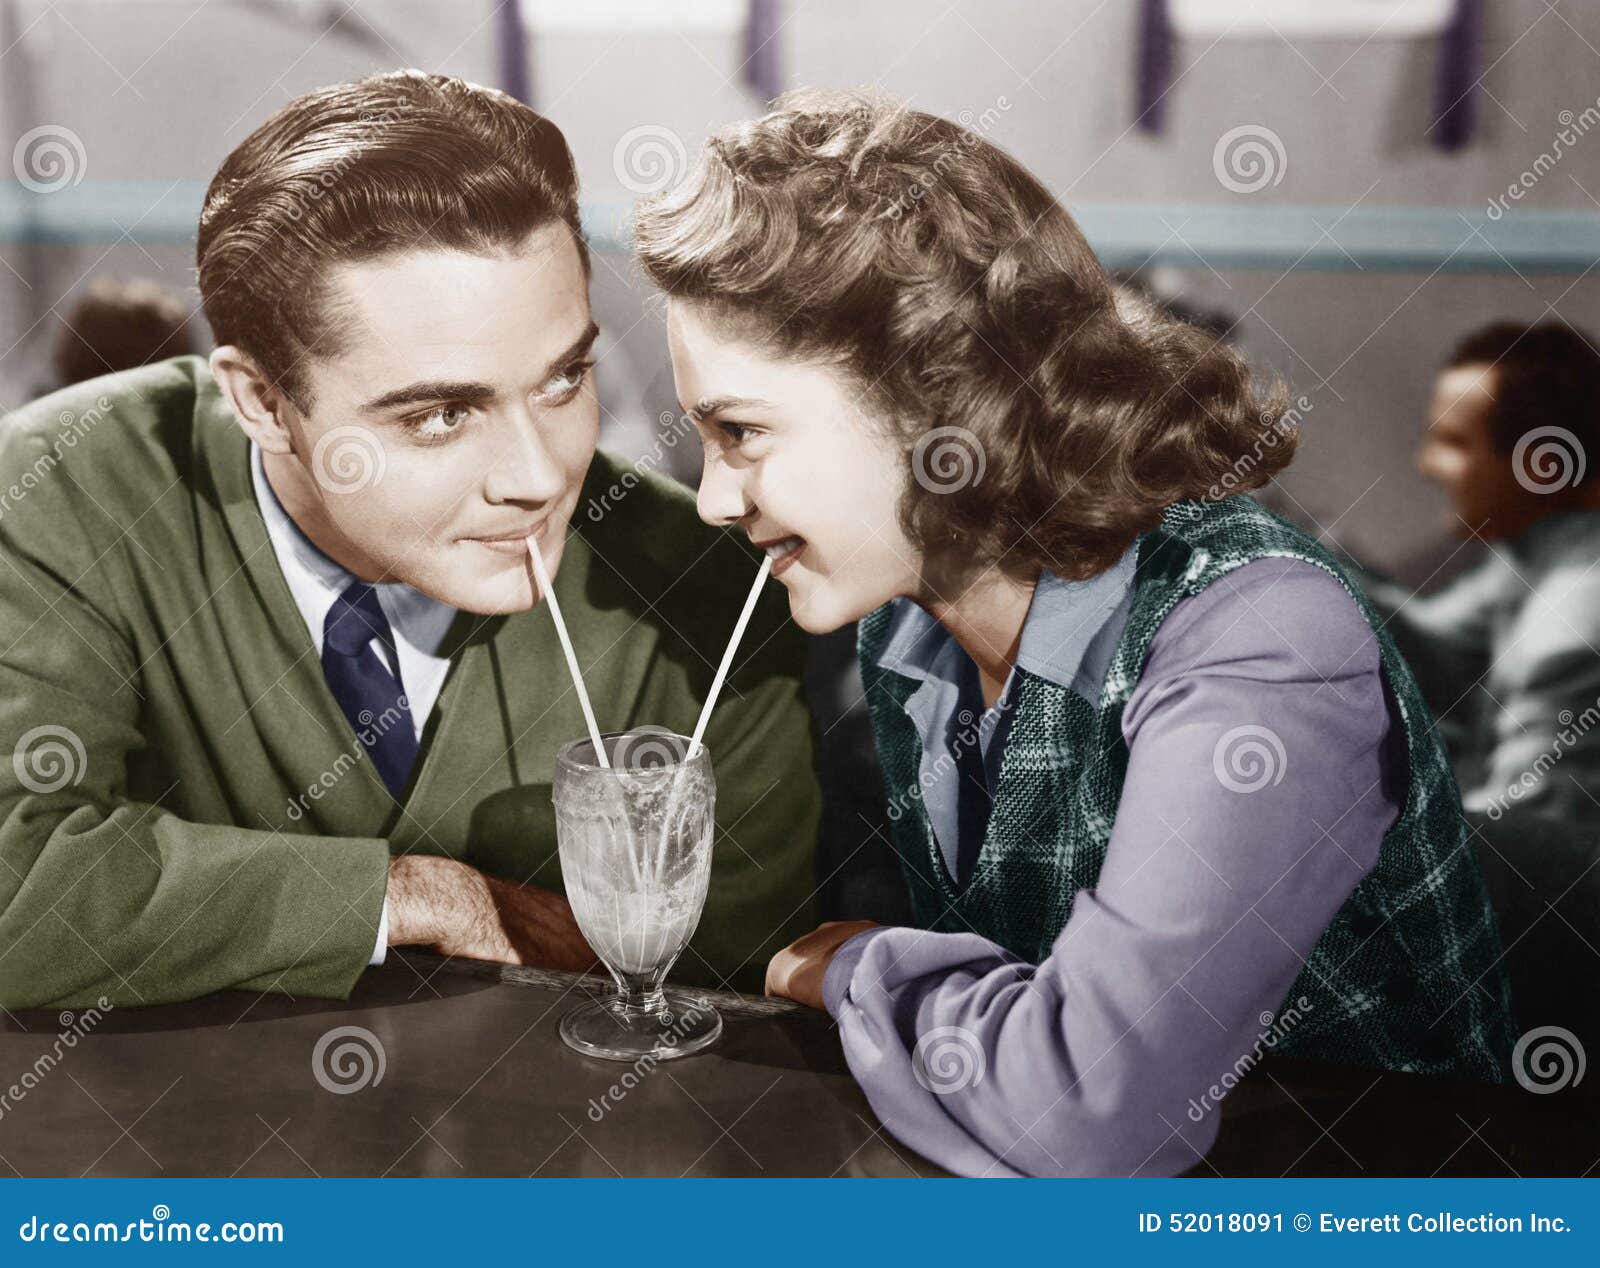 couple in a restaurant looking at each other and sharing a milk shake with two straws